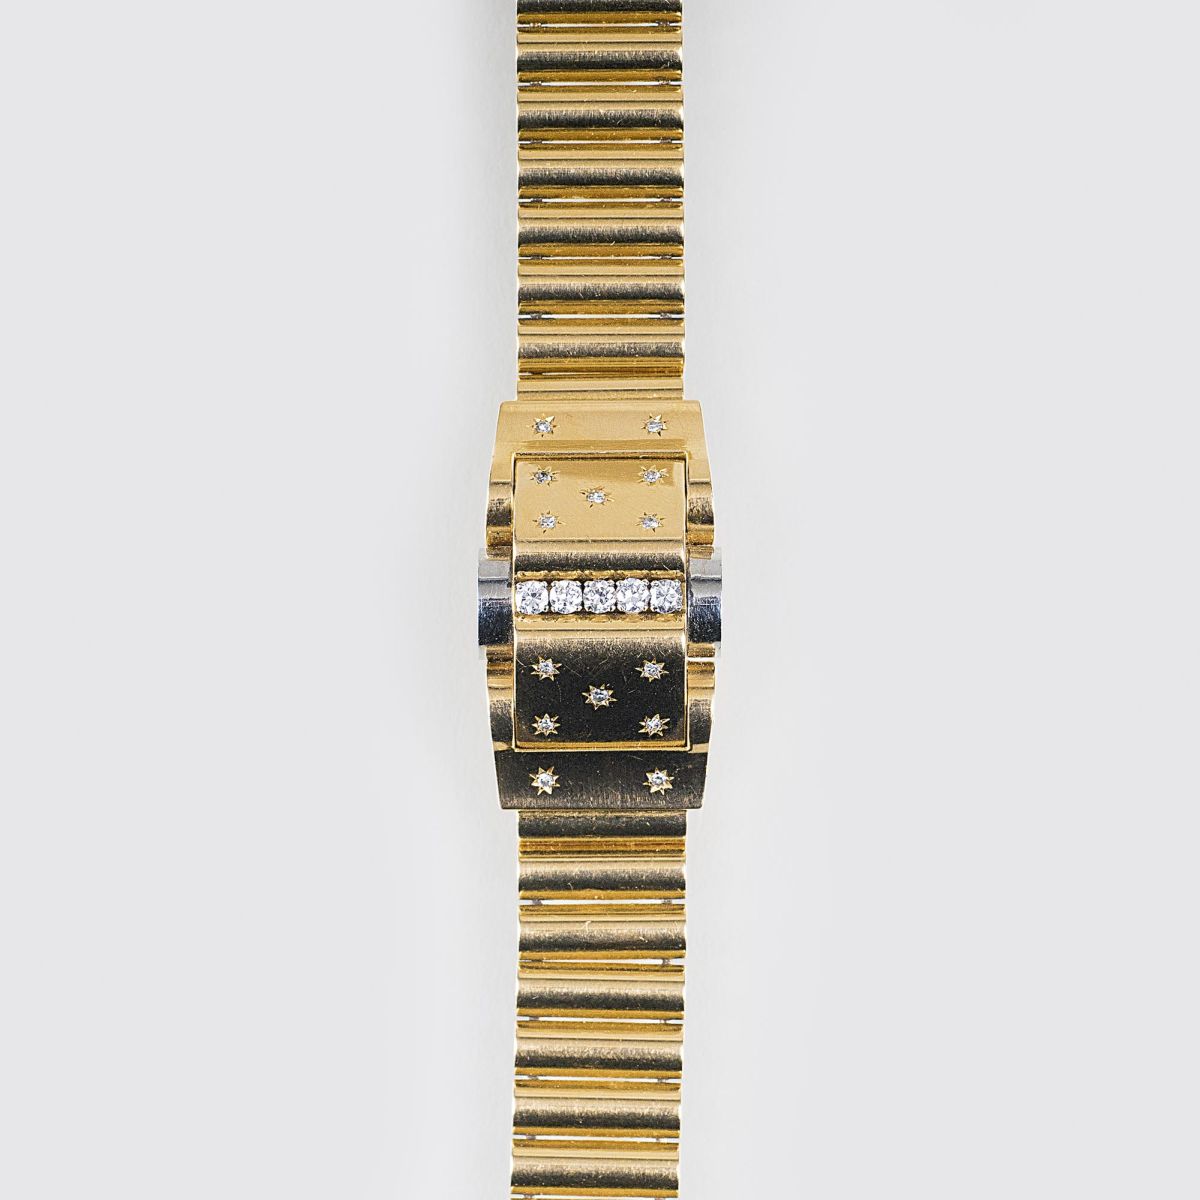 A French Art-déco Ladies' Watch with Diamonds - image 2